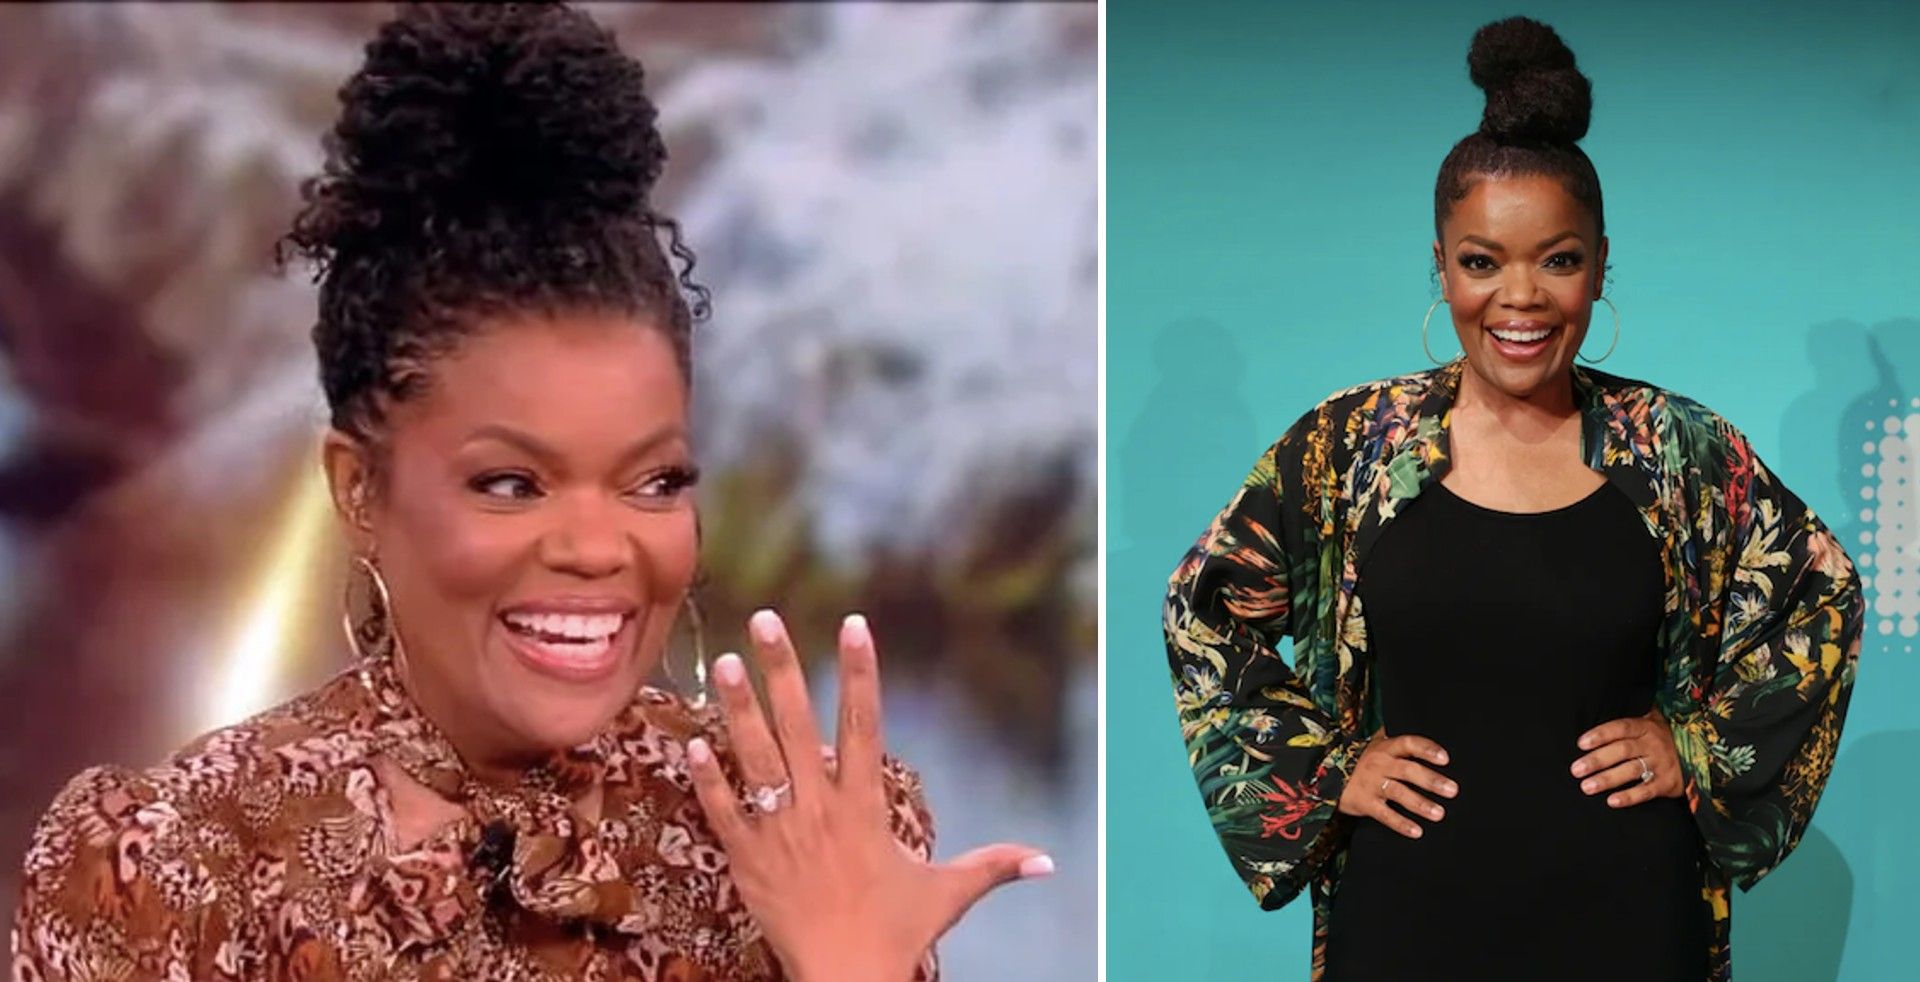 Actress Yvette Nicole Brown Announced Her Engagement While Guest Co-Hosting on The View—See Her Stunning Engagement Ring! image1